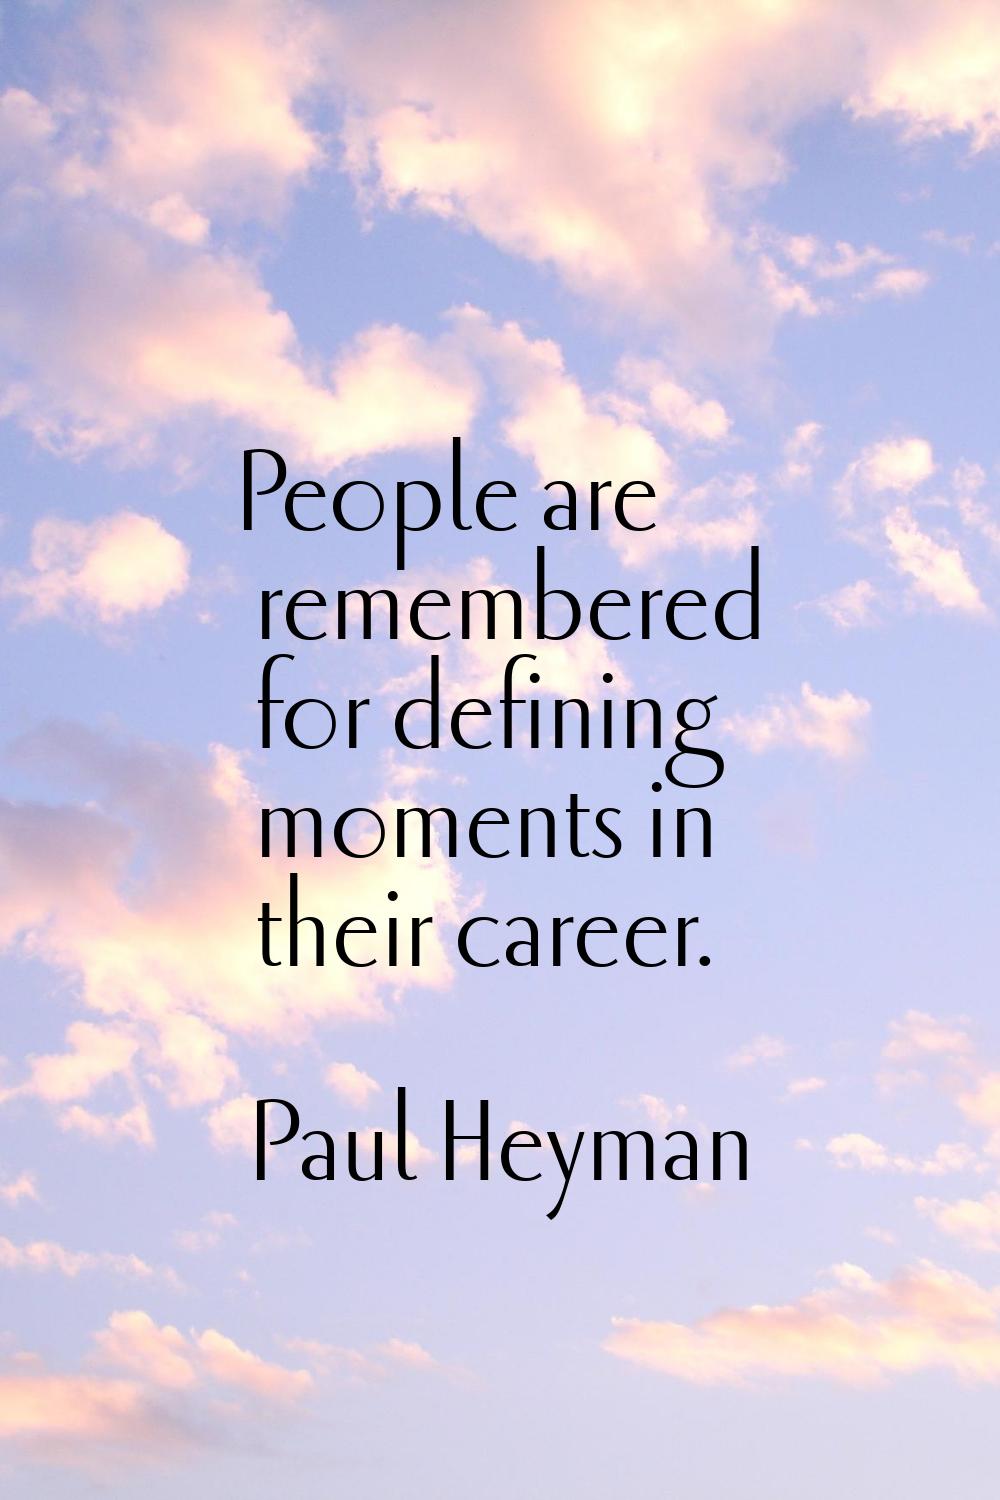 People are remembered for defining moments in their career.